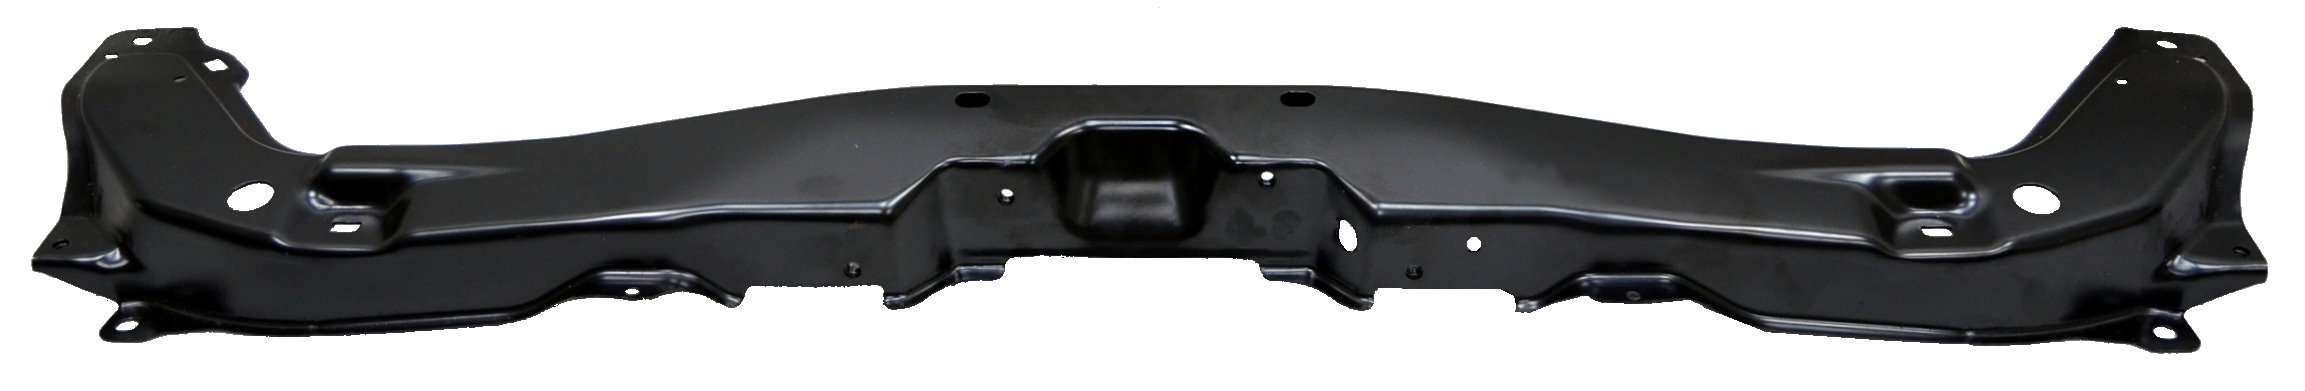 Aftermarket RADIATOR SUPPORTS for DODGE - GRAND CARAVAN, GRAND CARAVAN,11-20,Radiator support